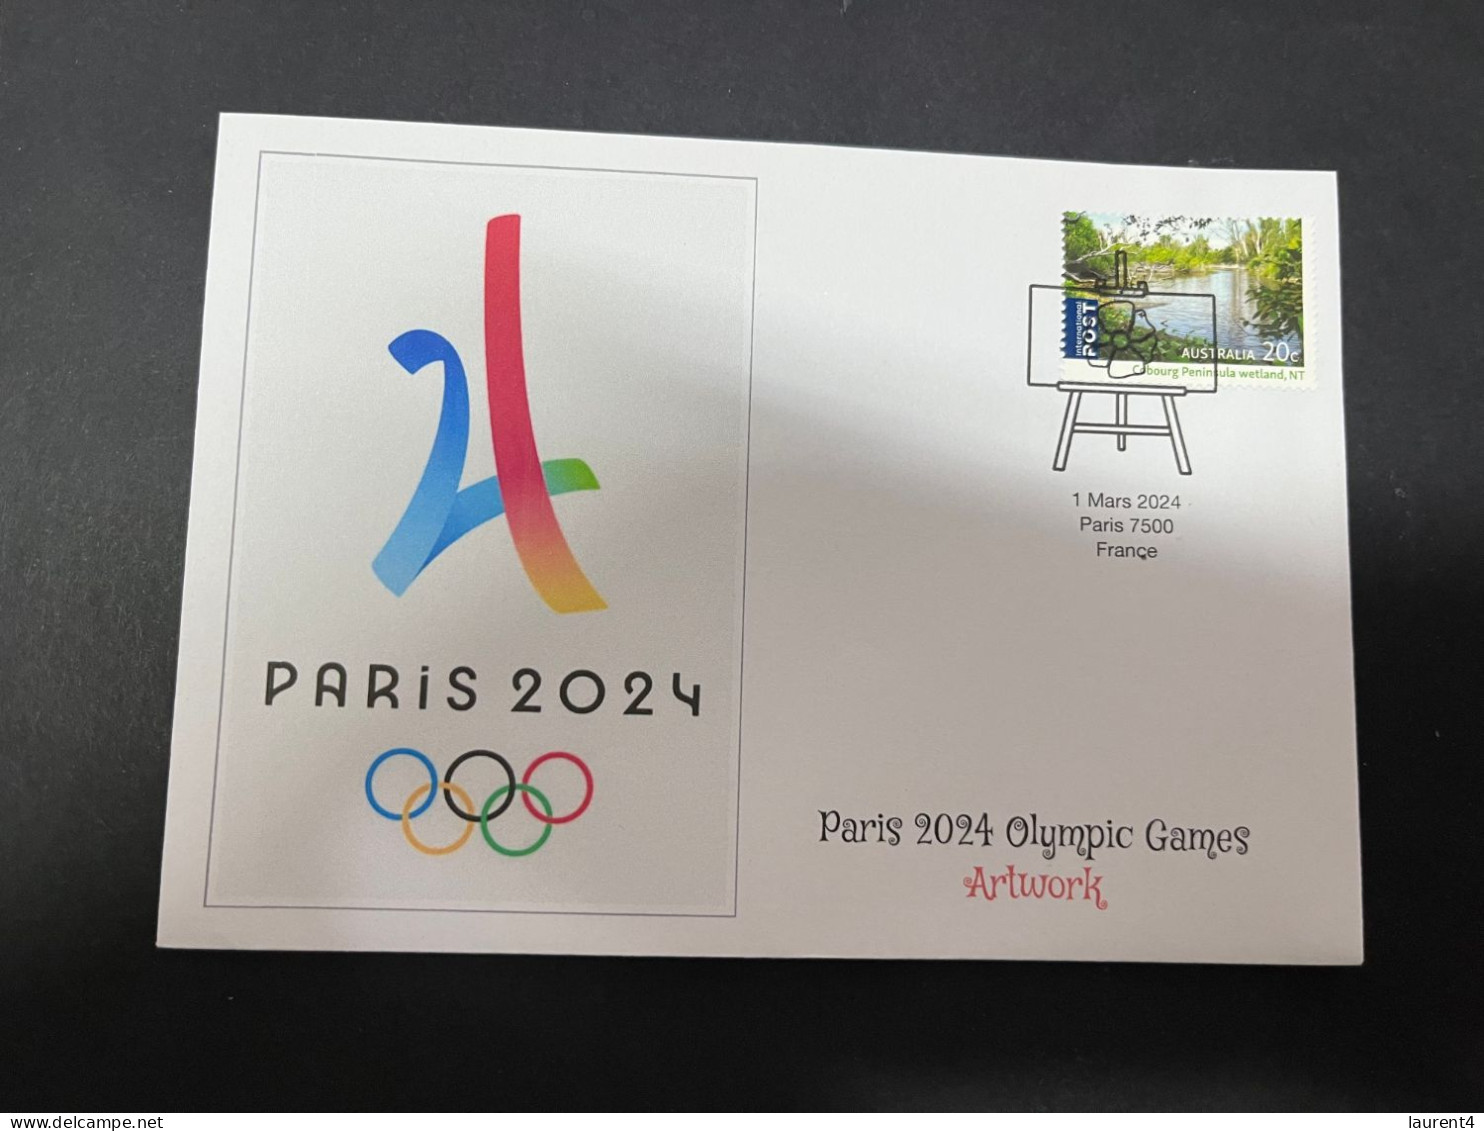 10-3-2024 (2 Y 37) Paris Olympic Games 2024 - 5 (of 12 Covers Series) For The Paris 2024 Olympic Games Artwork - Summer 2024: Paris